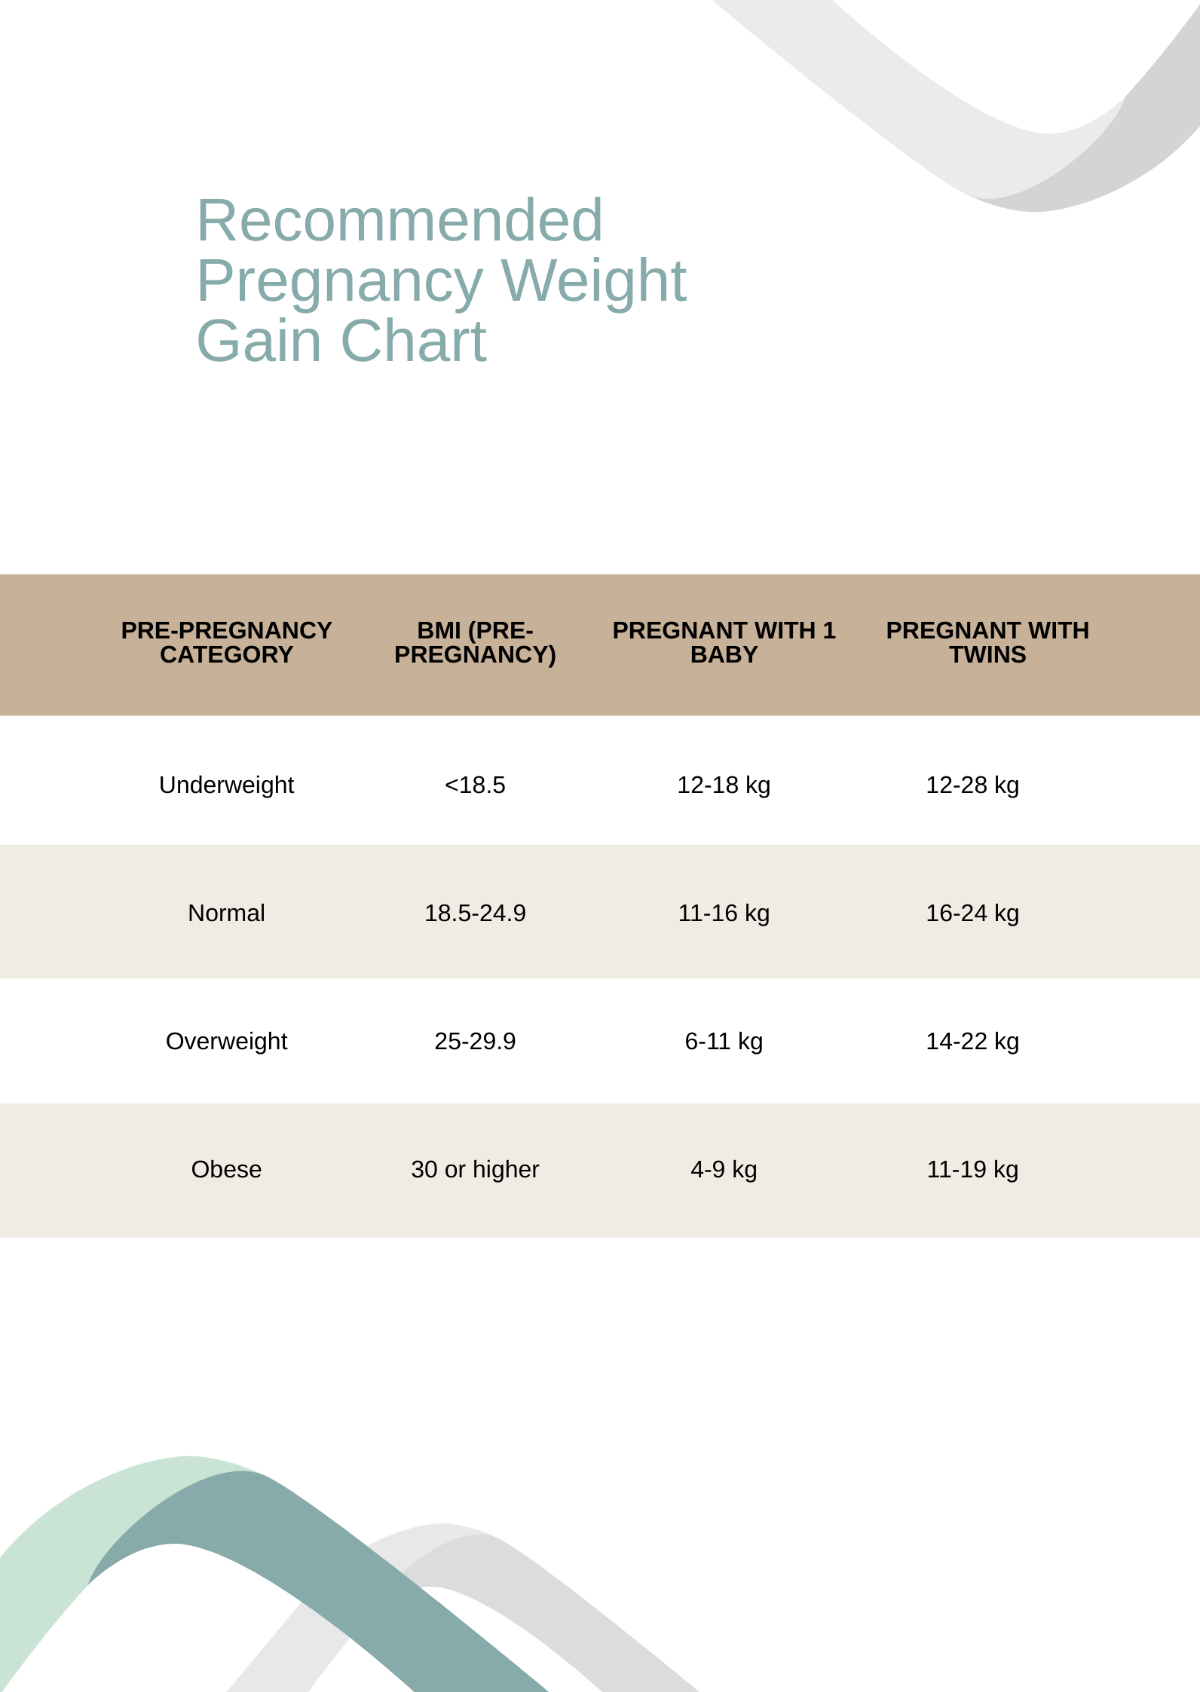 Recommended Pregnancy Weight Gain Chart Template